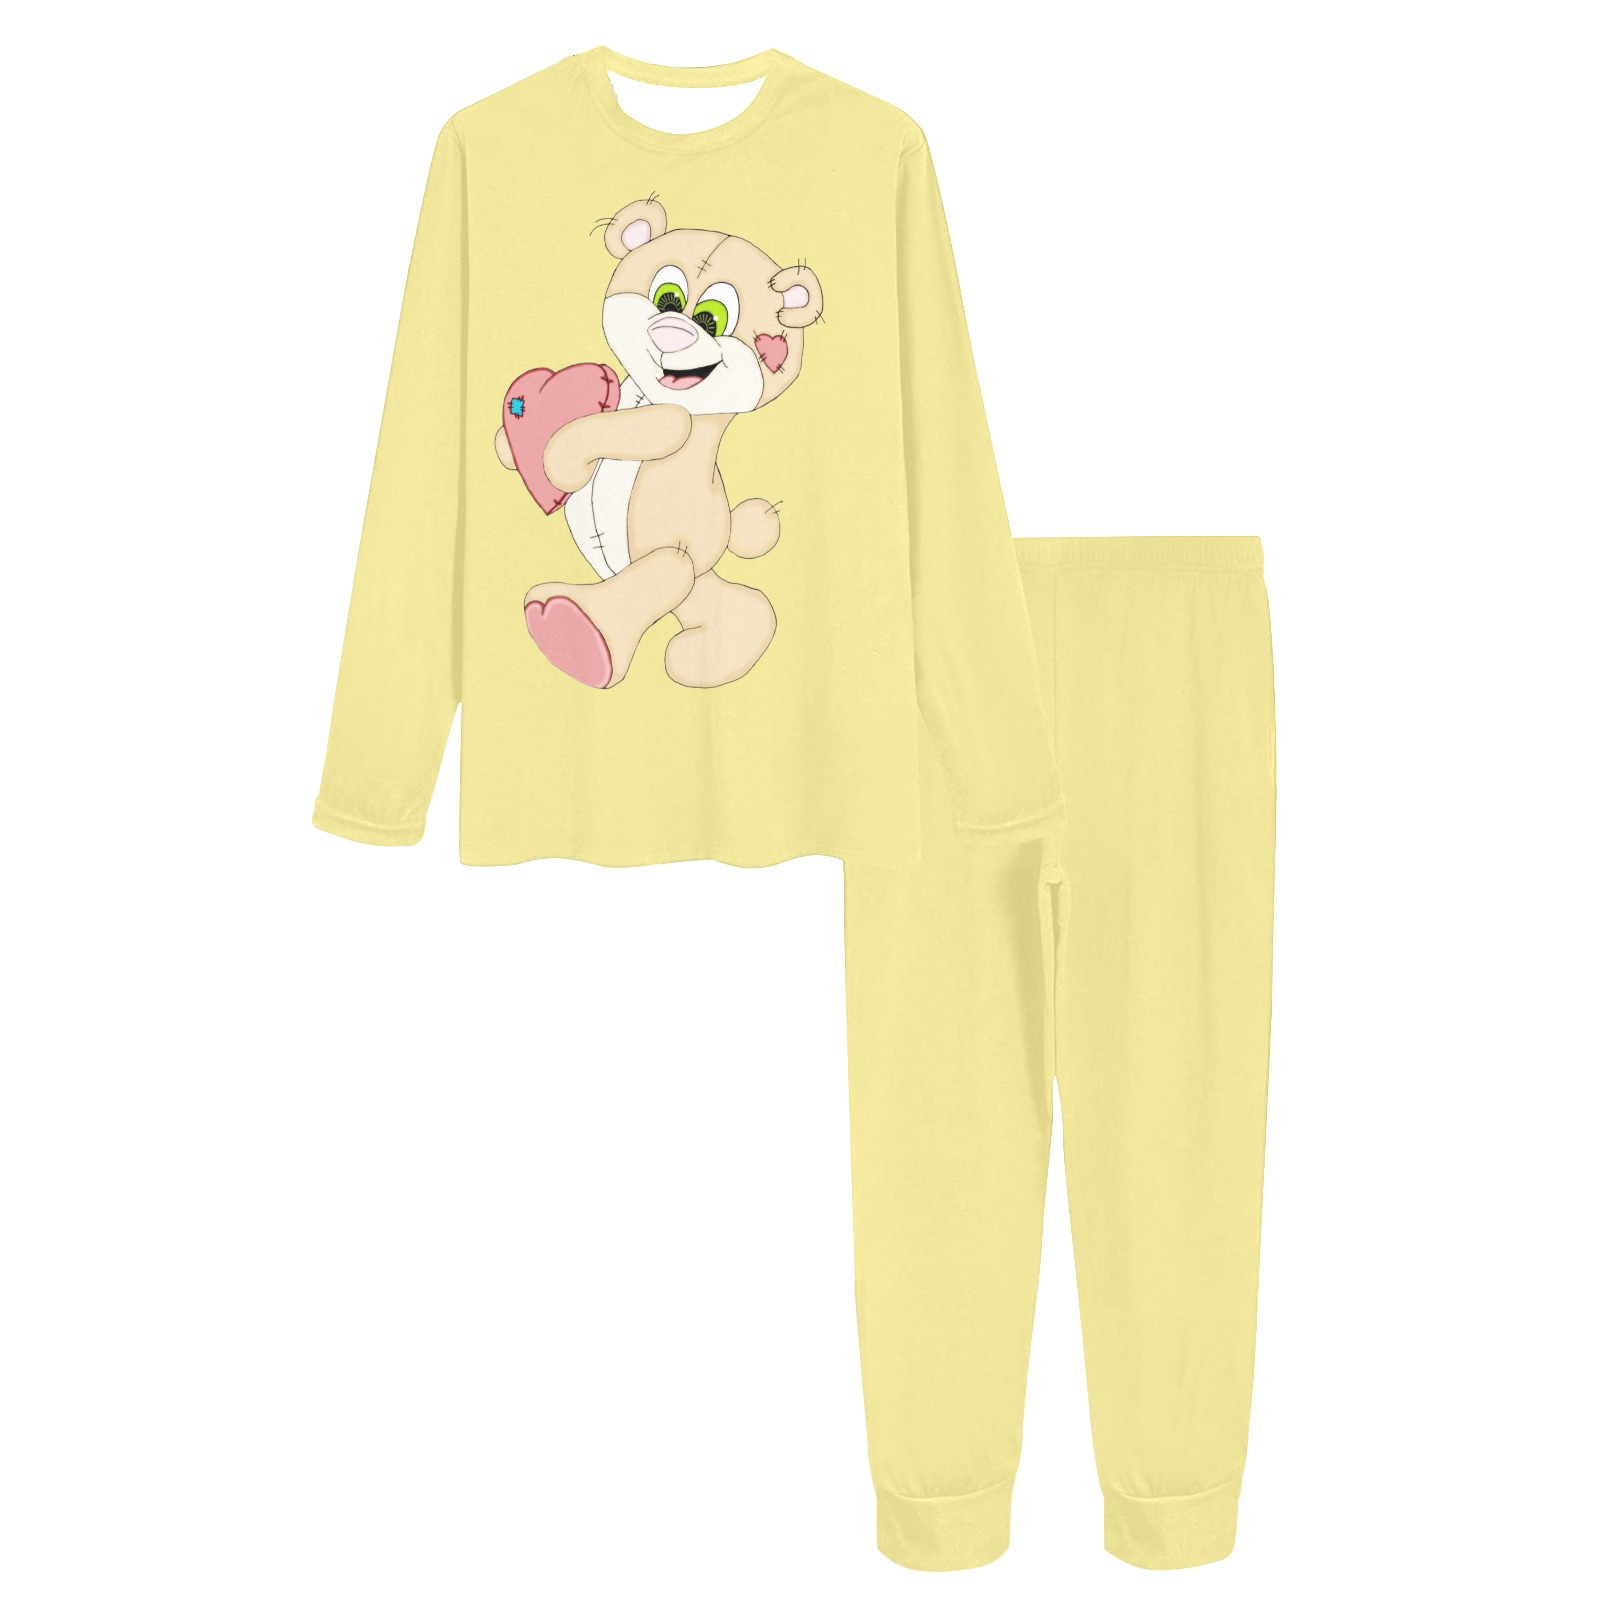 Patchwork Heart Teddy Soft Yellow Women's All Over Print Pajama Set